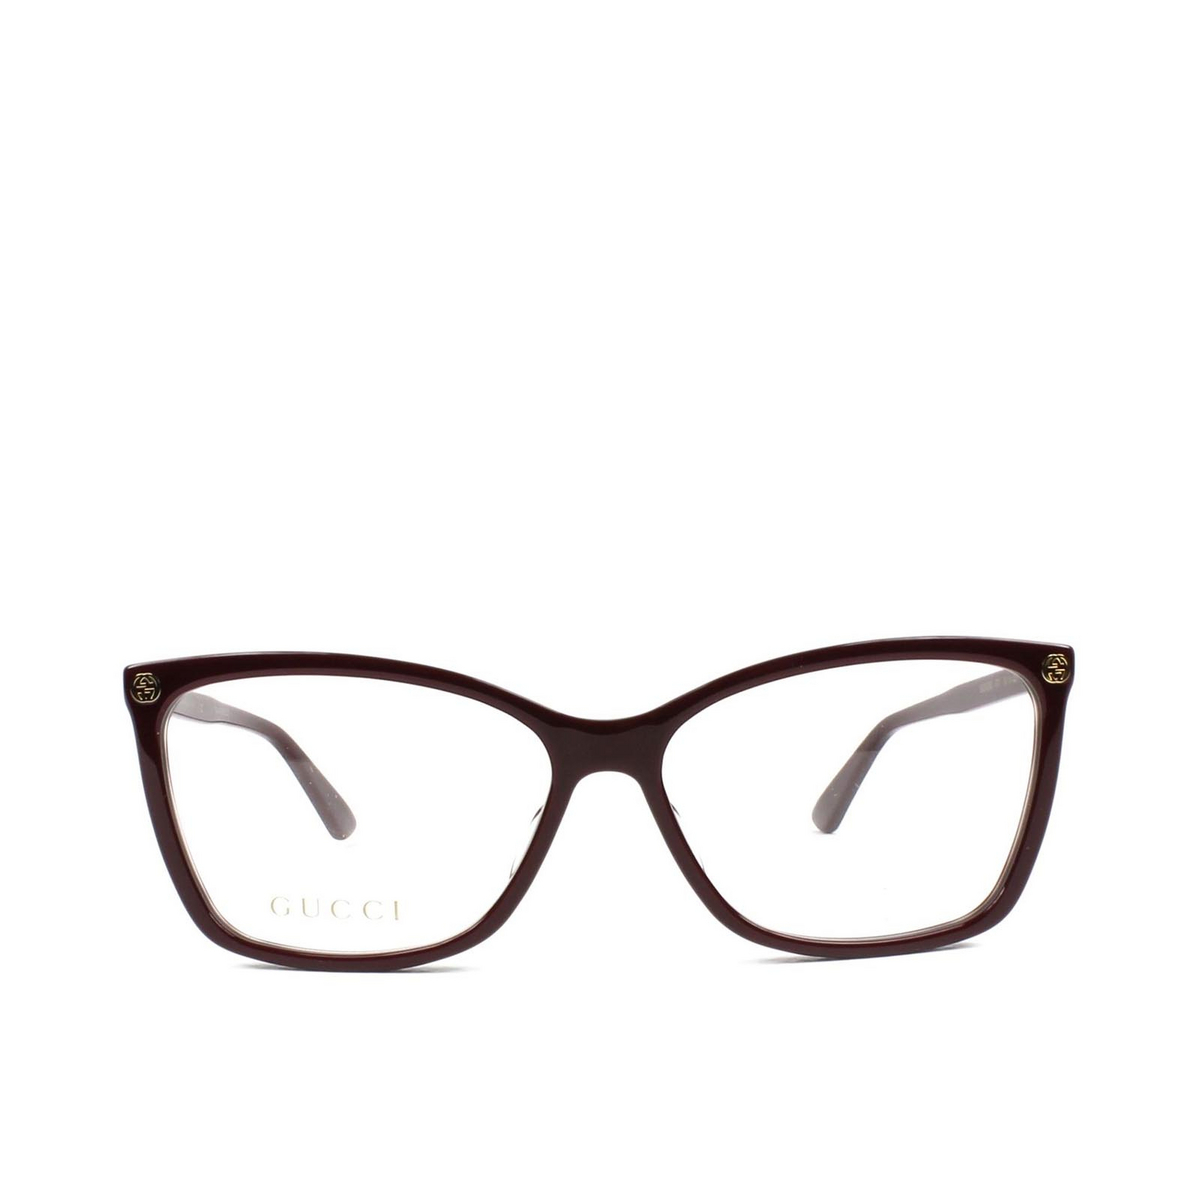 Gucci® Cat-eye Eyeglasses: GG0025O color Burgundy 007 - front view.